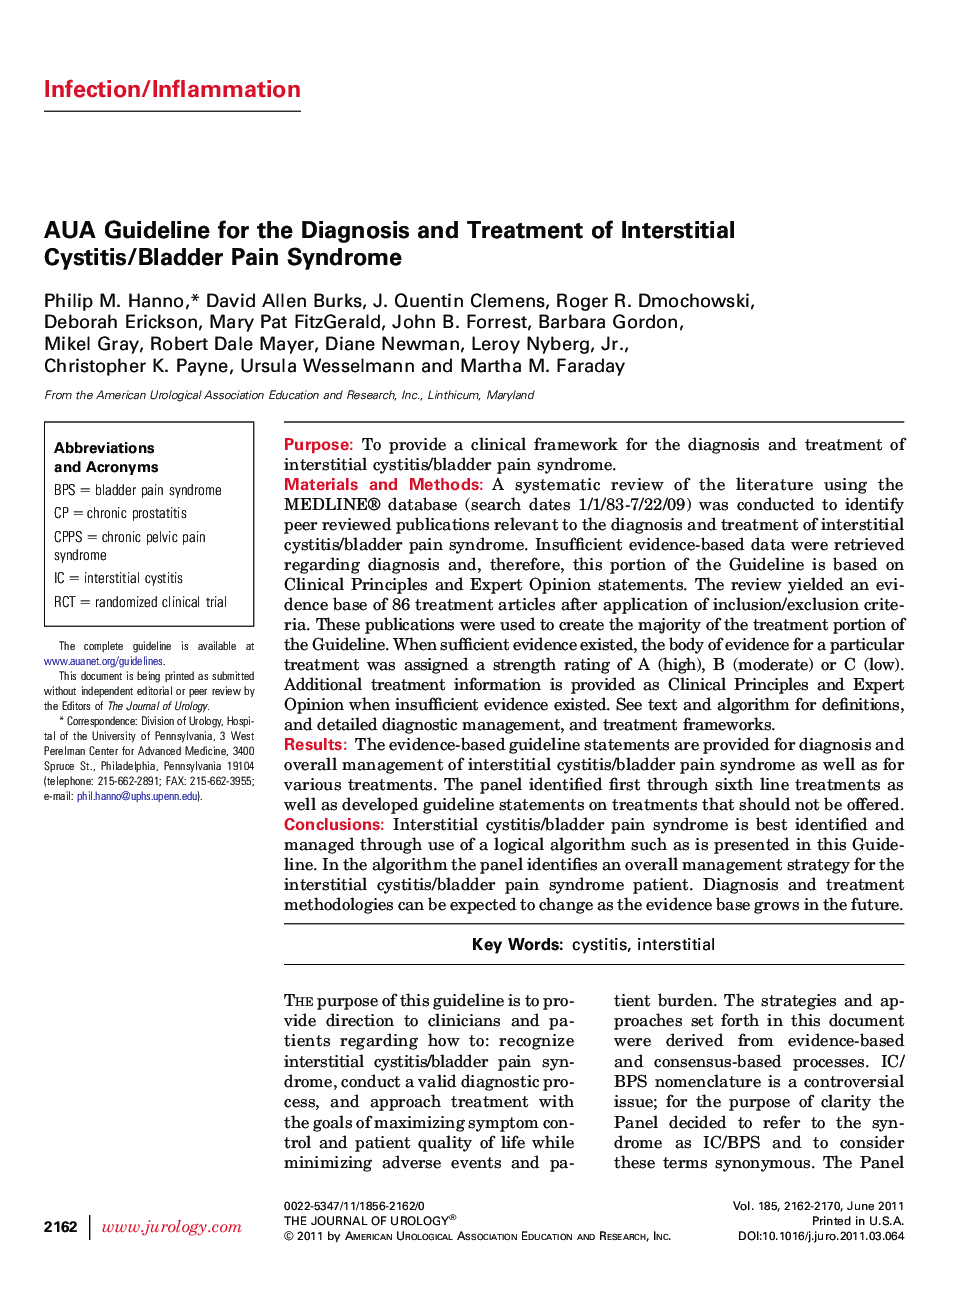 AUA Guideline for the Diagnosis and Treatment of Interstitial Cystitis/Bladder Pain Syndrome 